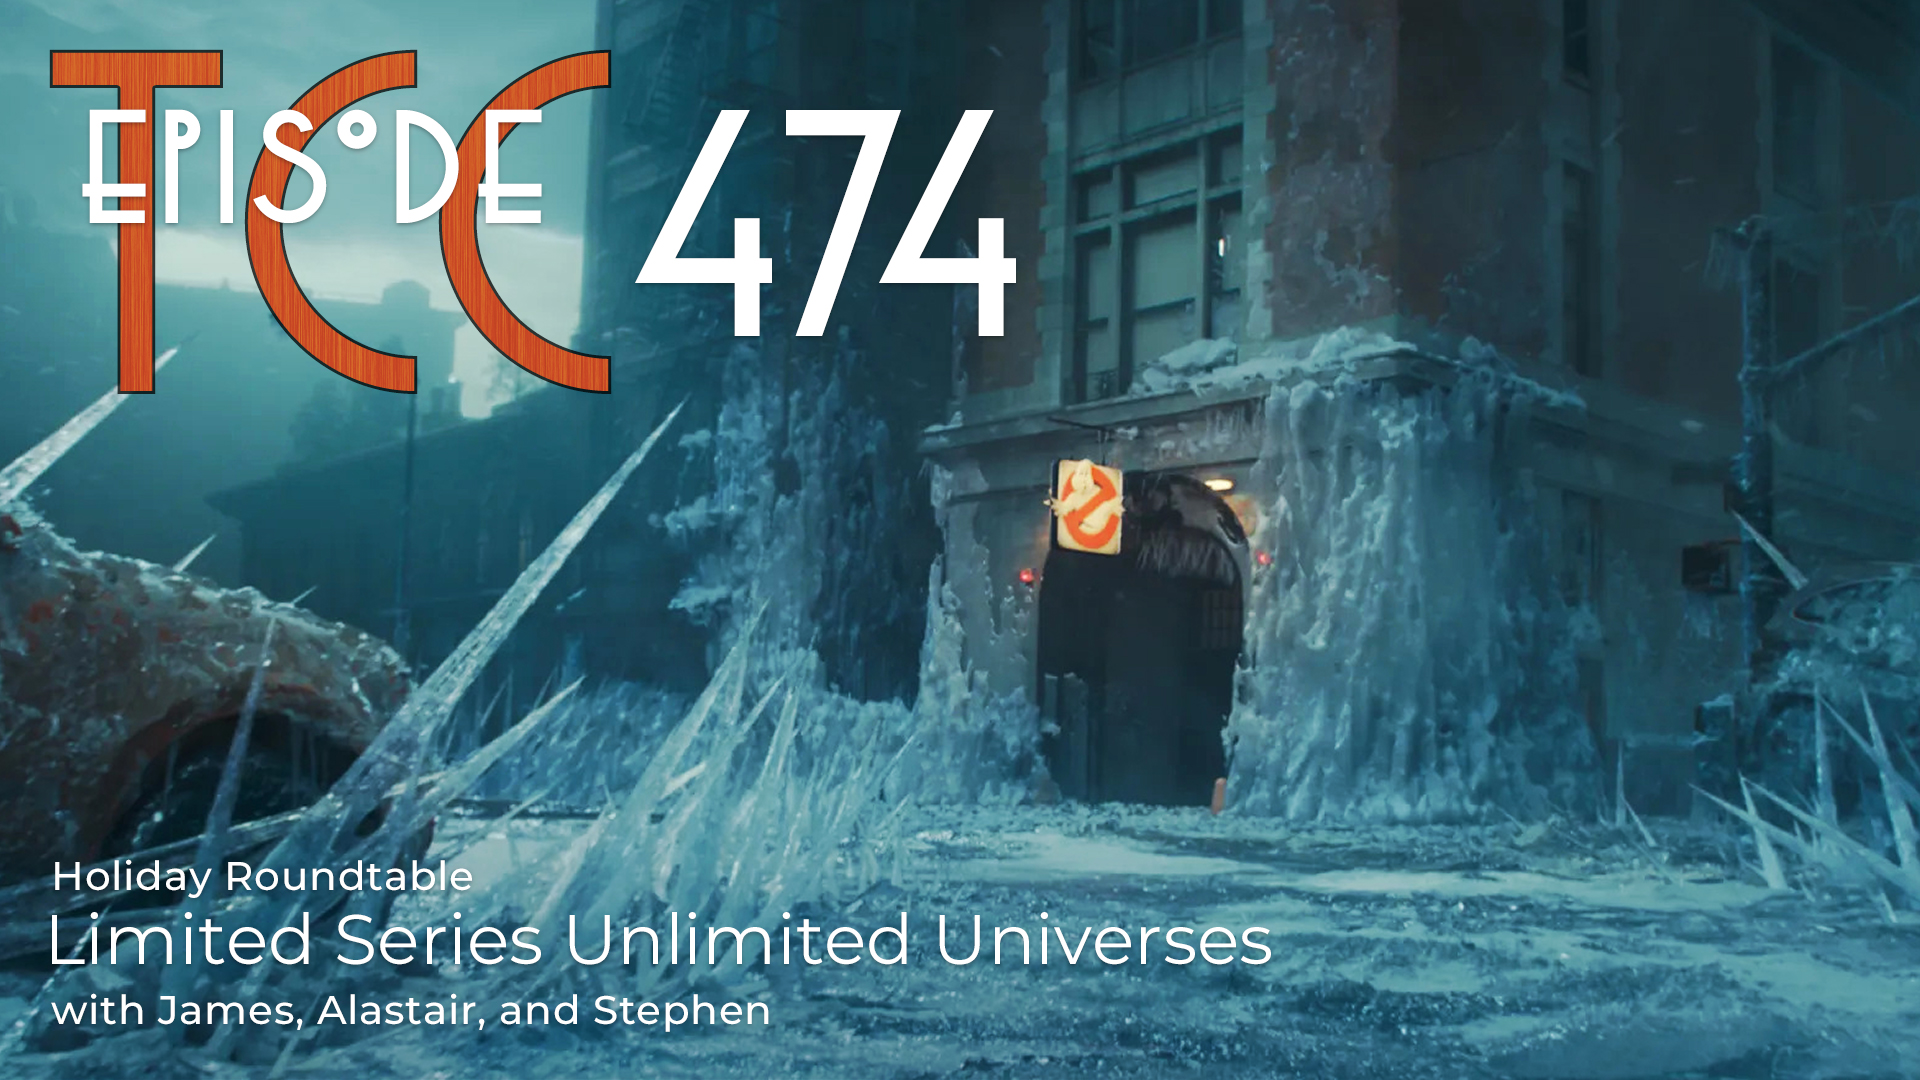 The Citadel Cafe 474: Limited Series Unlimited Universes